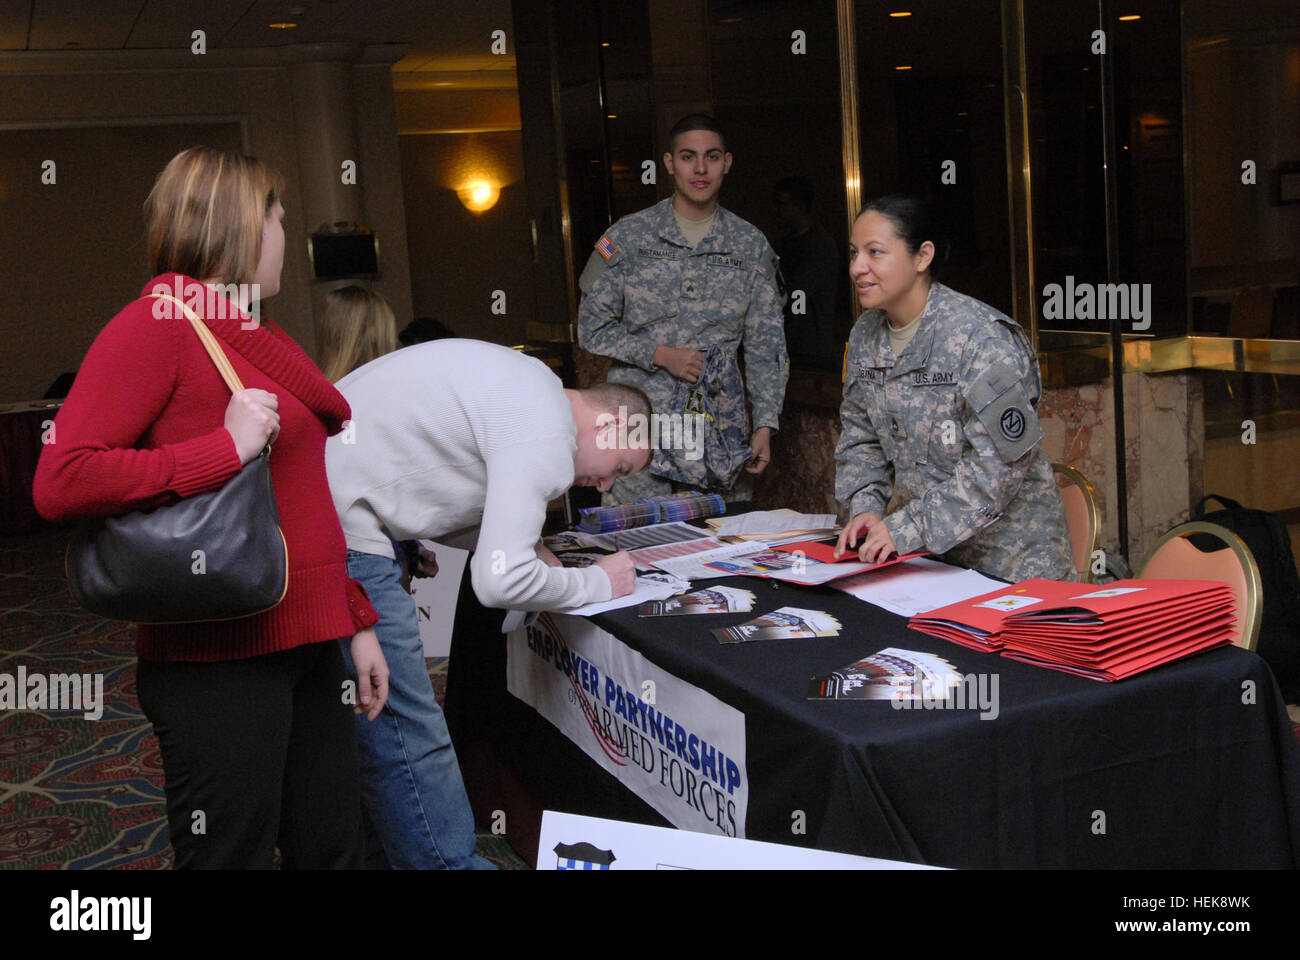 Sfc. Doris Urbina (right) inprocesses a family at the Yellow Ribbon Reintegration event that was held at the Trump Plaza in Atlantic City, N.J.. The Yellow Ribbon Reintegration event was hosted by the 99th Regional Support Command, headquartered  at Joint Base McGuire-Dix-Lakehurst. The program consists of seven events that take place at intervals before and after mobilization, which gives the soldiers and family members information, counseling, skills and techniques for upcoming deployments and re-deployments. For more information about the Yellow Ribbon Program please check out http://www.ar Stock Photo